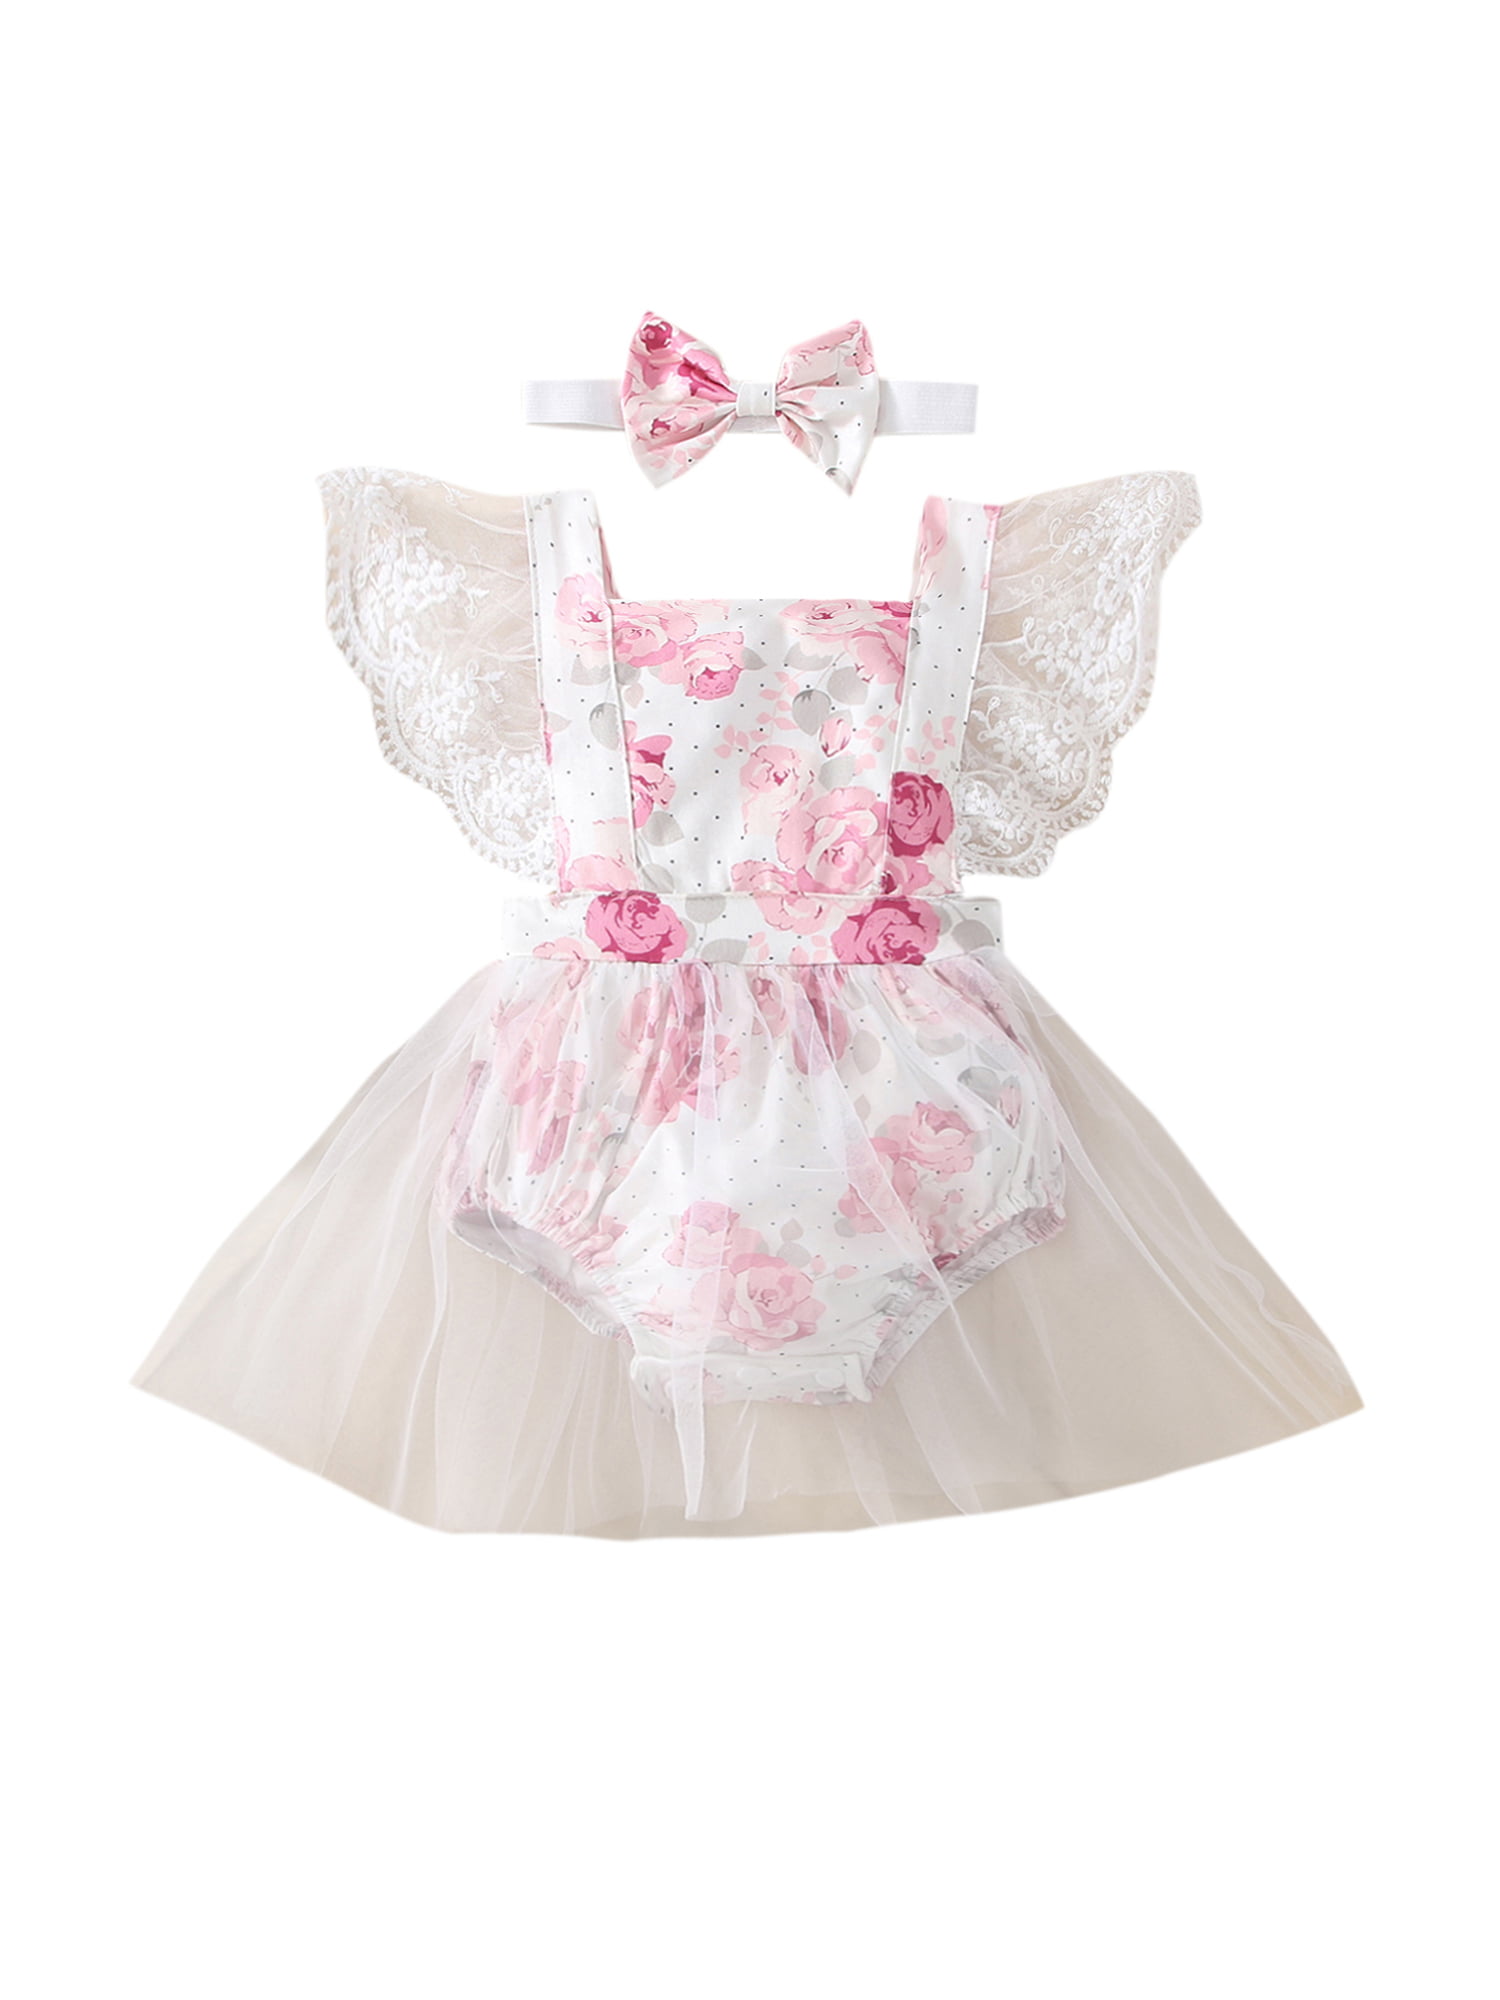 2PCs Easter Toddler Newborn Baby Girl Romper Jumpsuit V-Neck Lace Flying Sleeves Bunny Doll Princess Tutu Dress Bow Headband 0-24 Months Girls Bodysuit Crawling Pants Casual Clothes Set